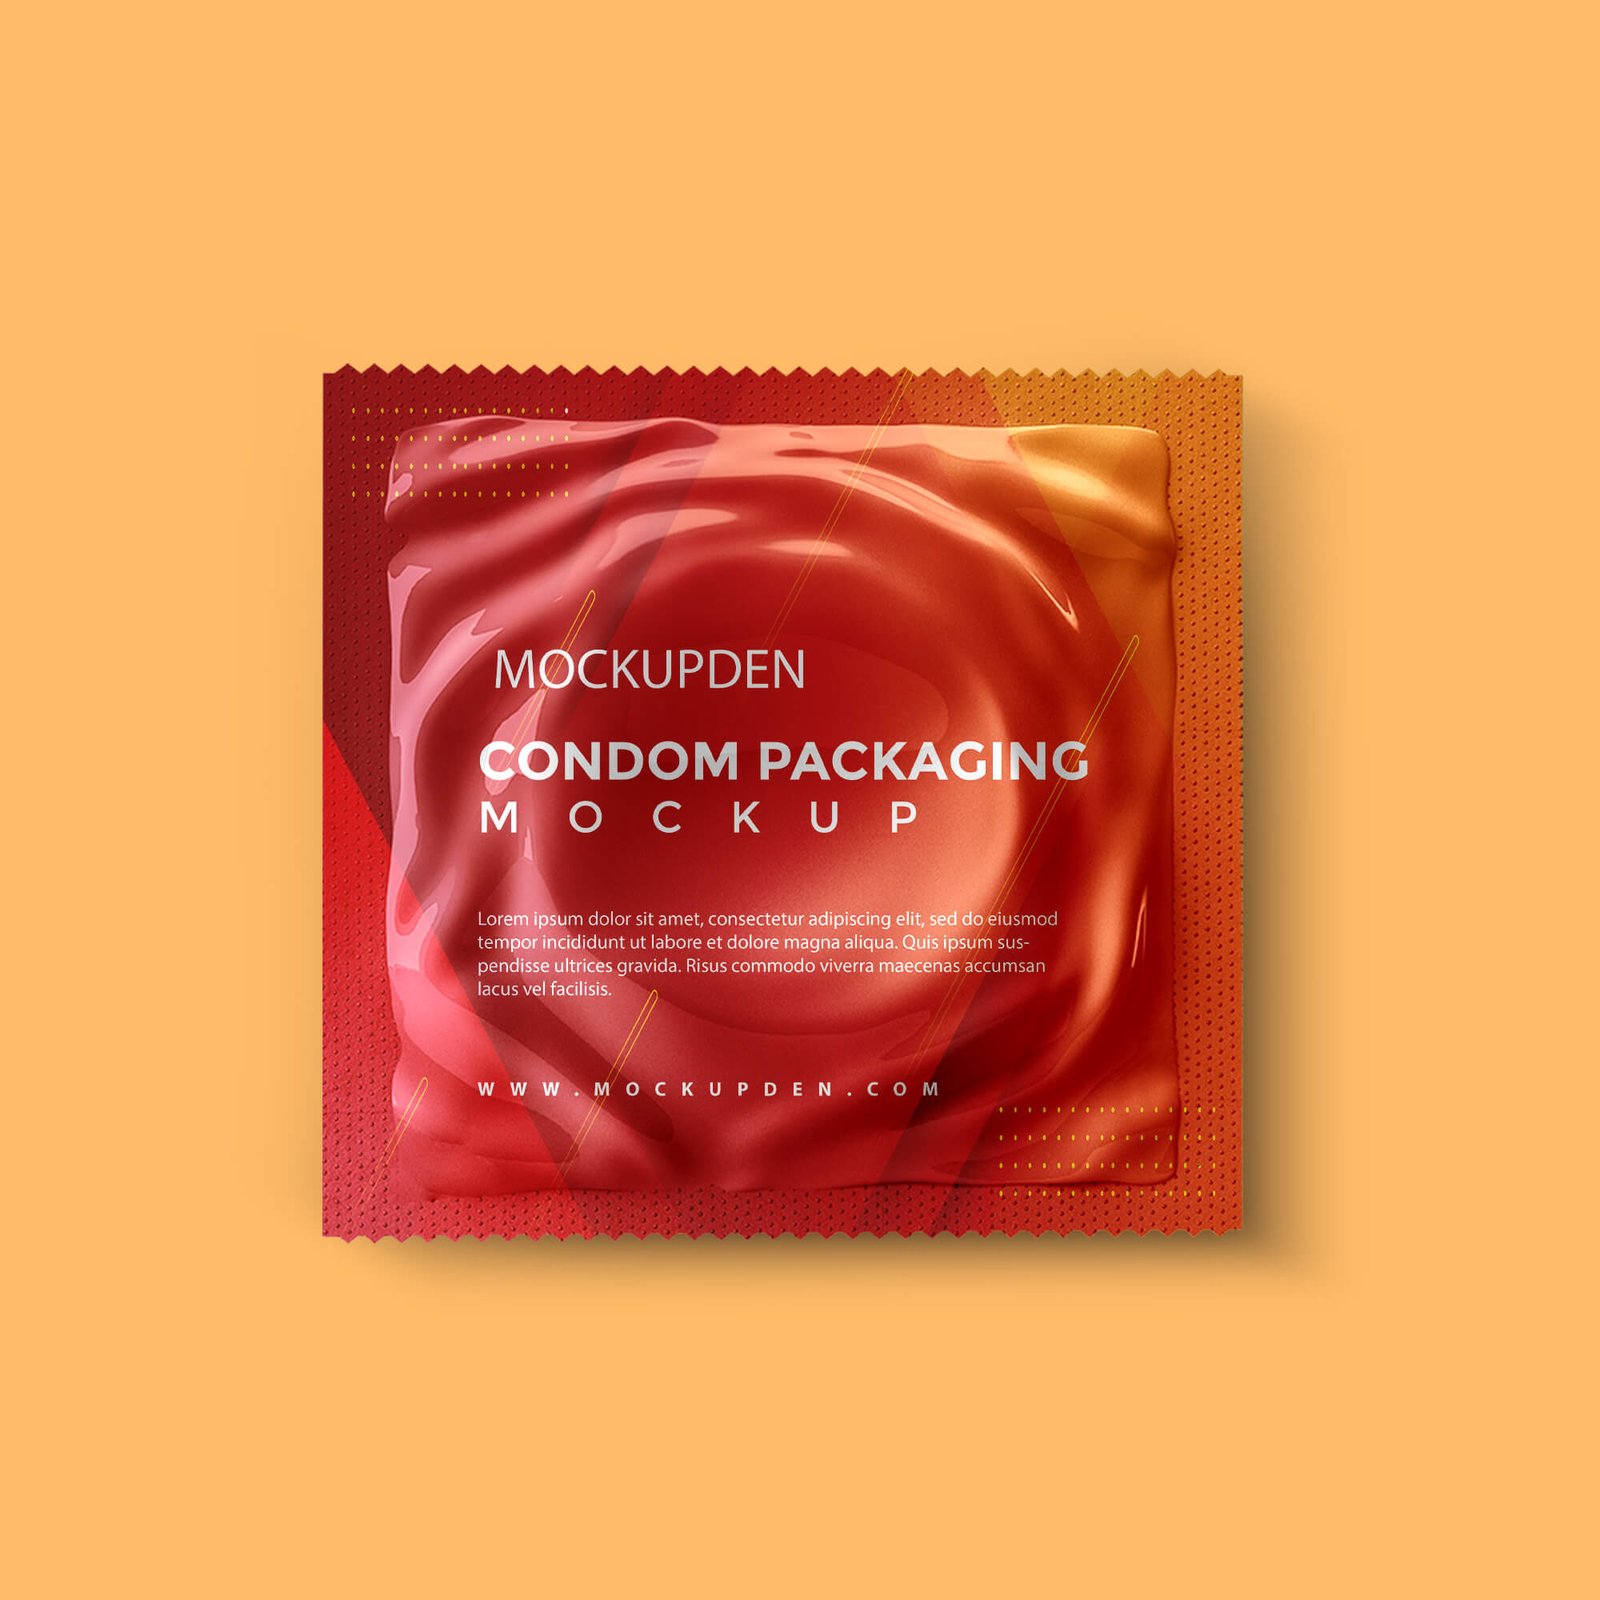 Design Free Condom Packaging Mockup PSD Template